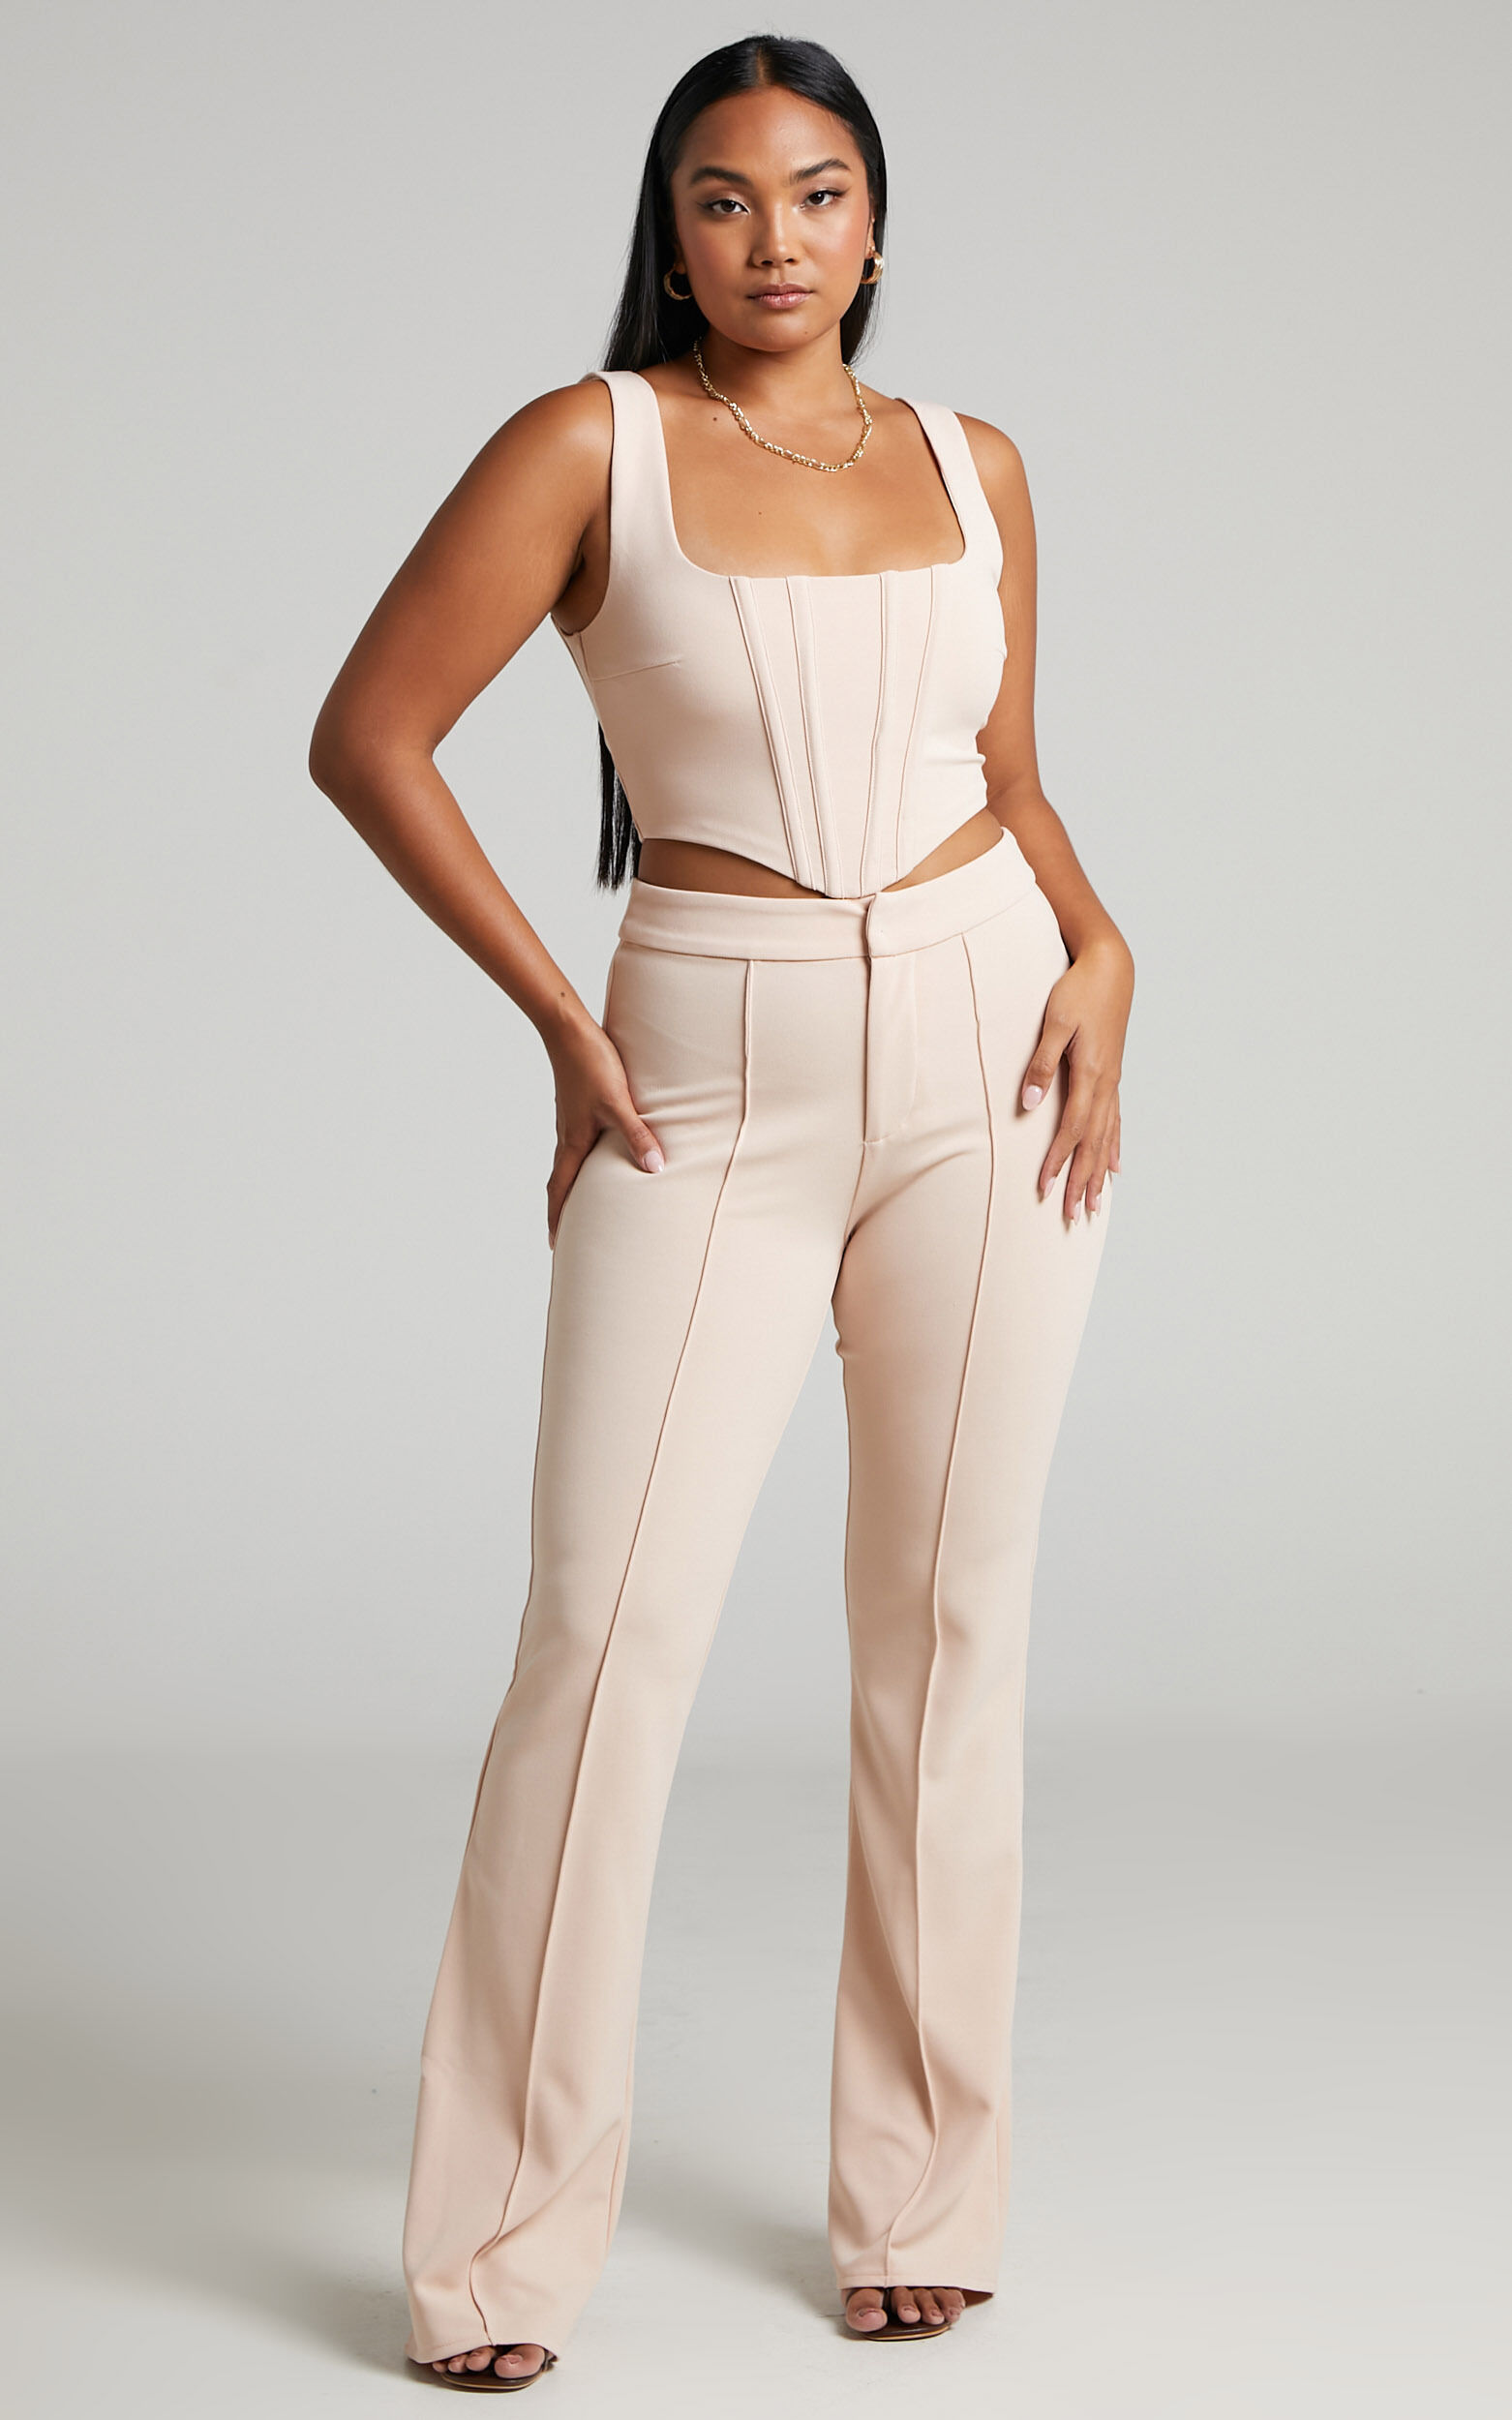 Ritta Two Piece Set - Corset Top and Pants Set in Cream